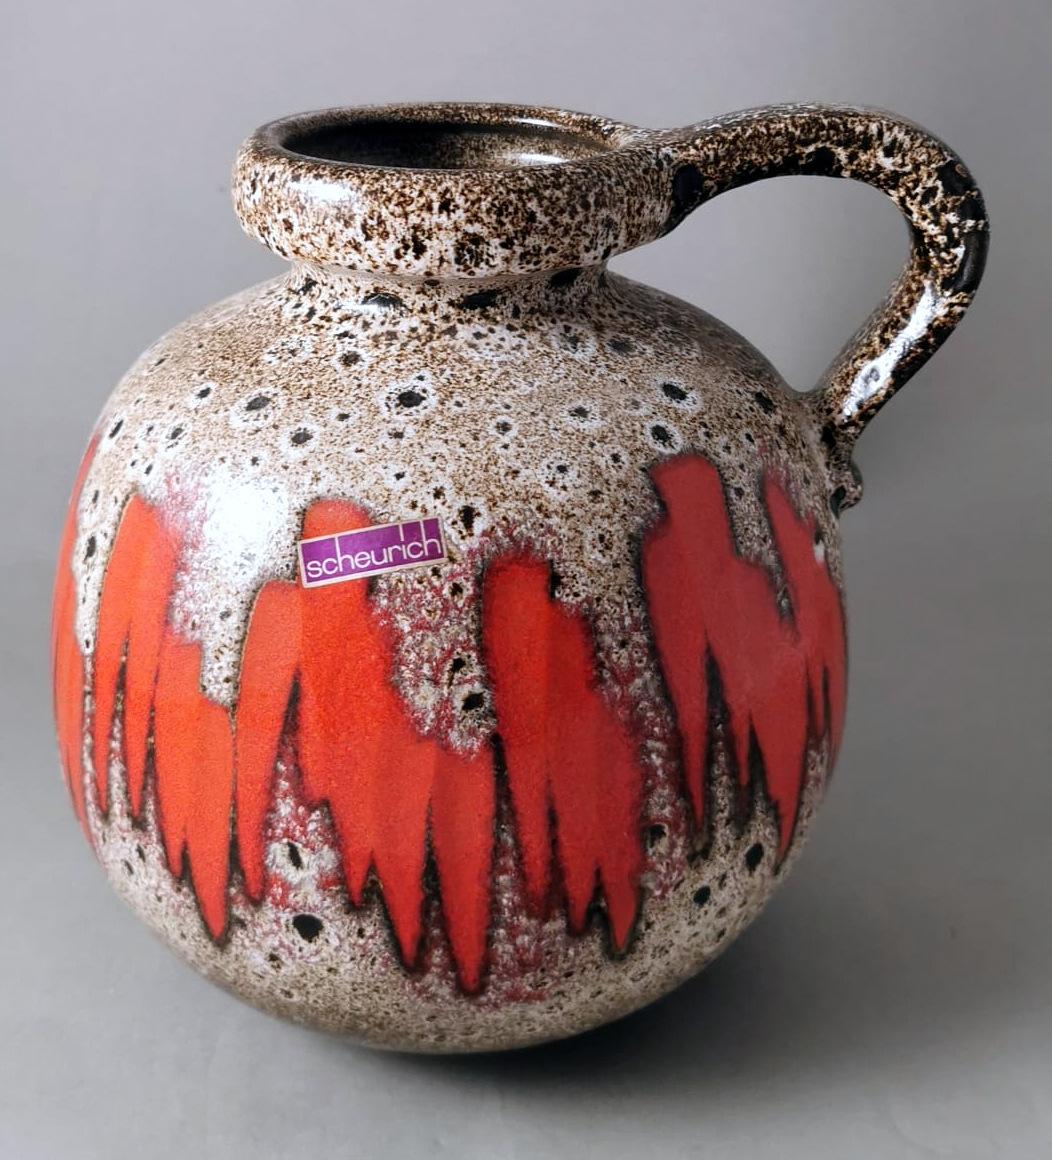 We kindly suggest that you read the whole description, as with it we try to give you detailed technical and historical information to guarantee the authenticity of our objects.
Particular and original German colored ceramic jug; it has an innovative